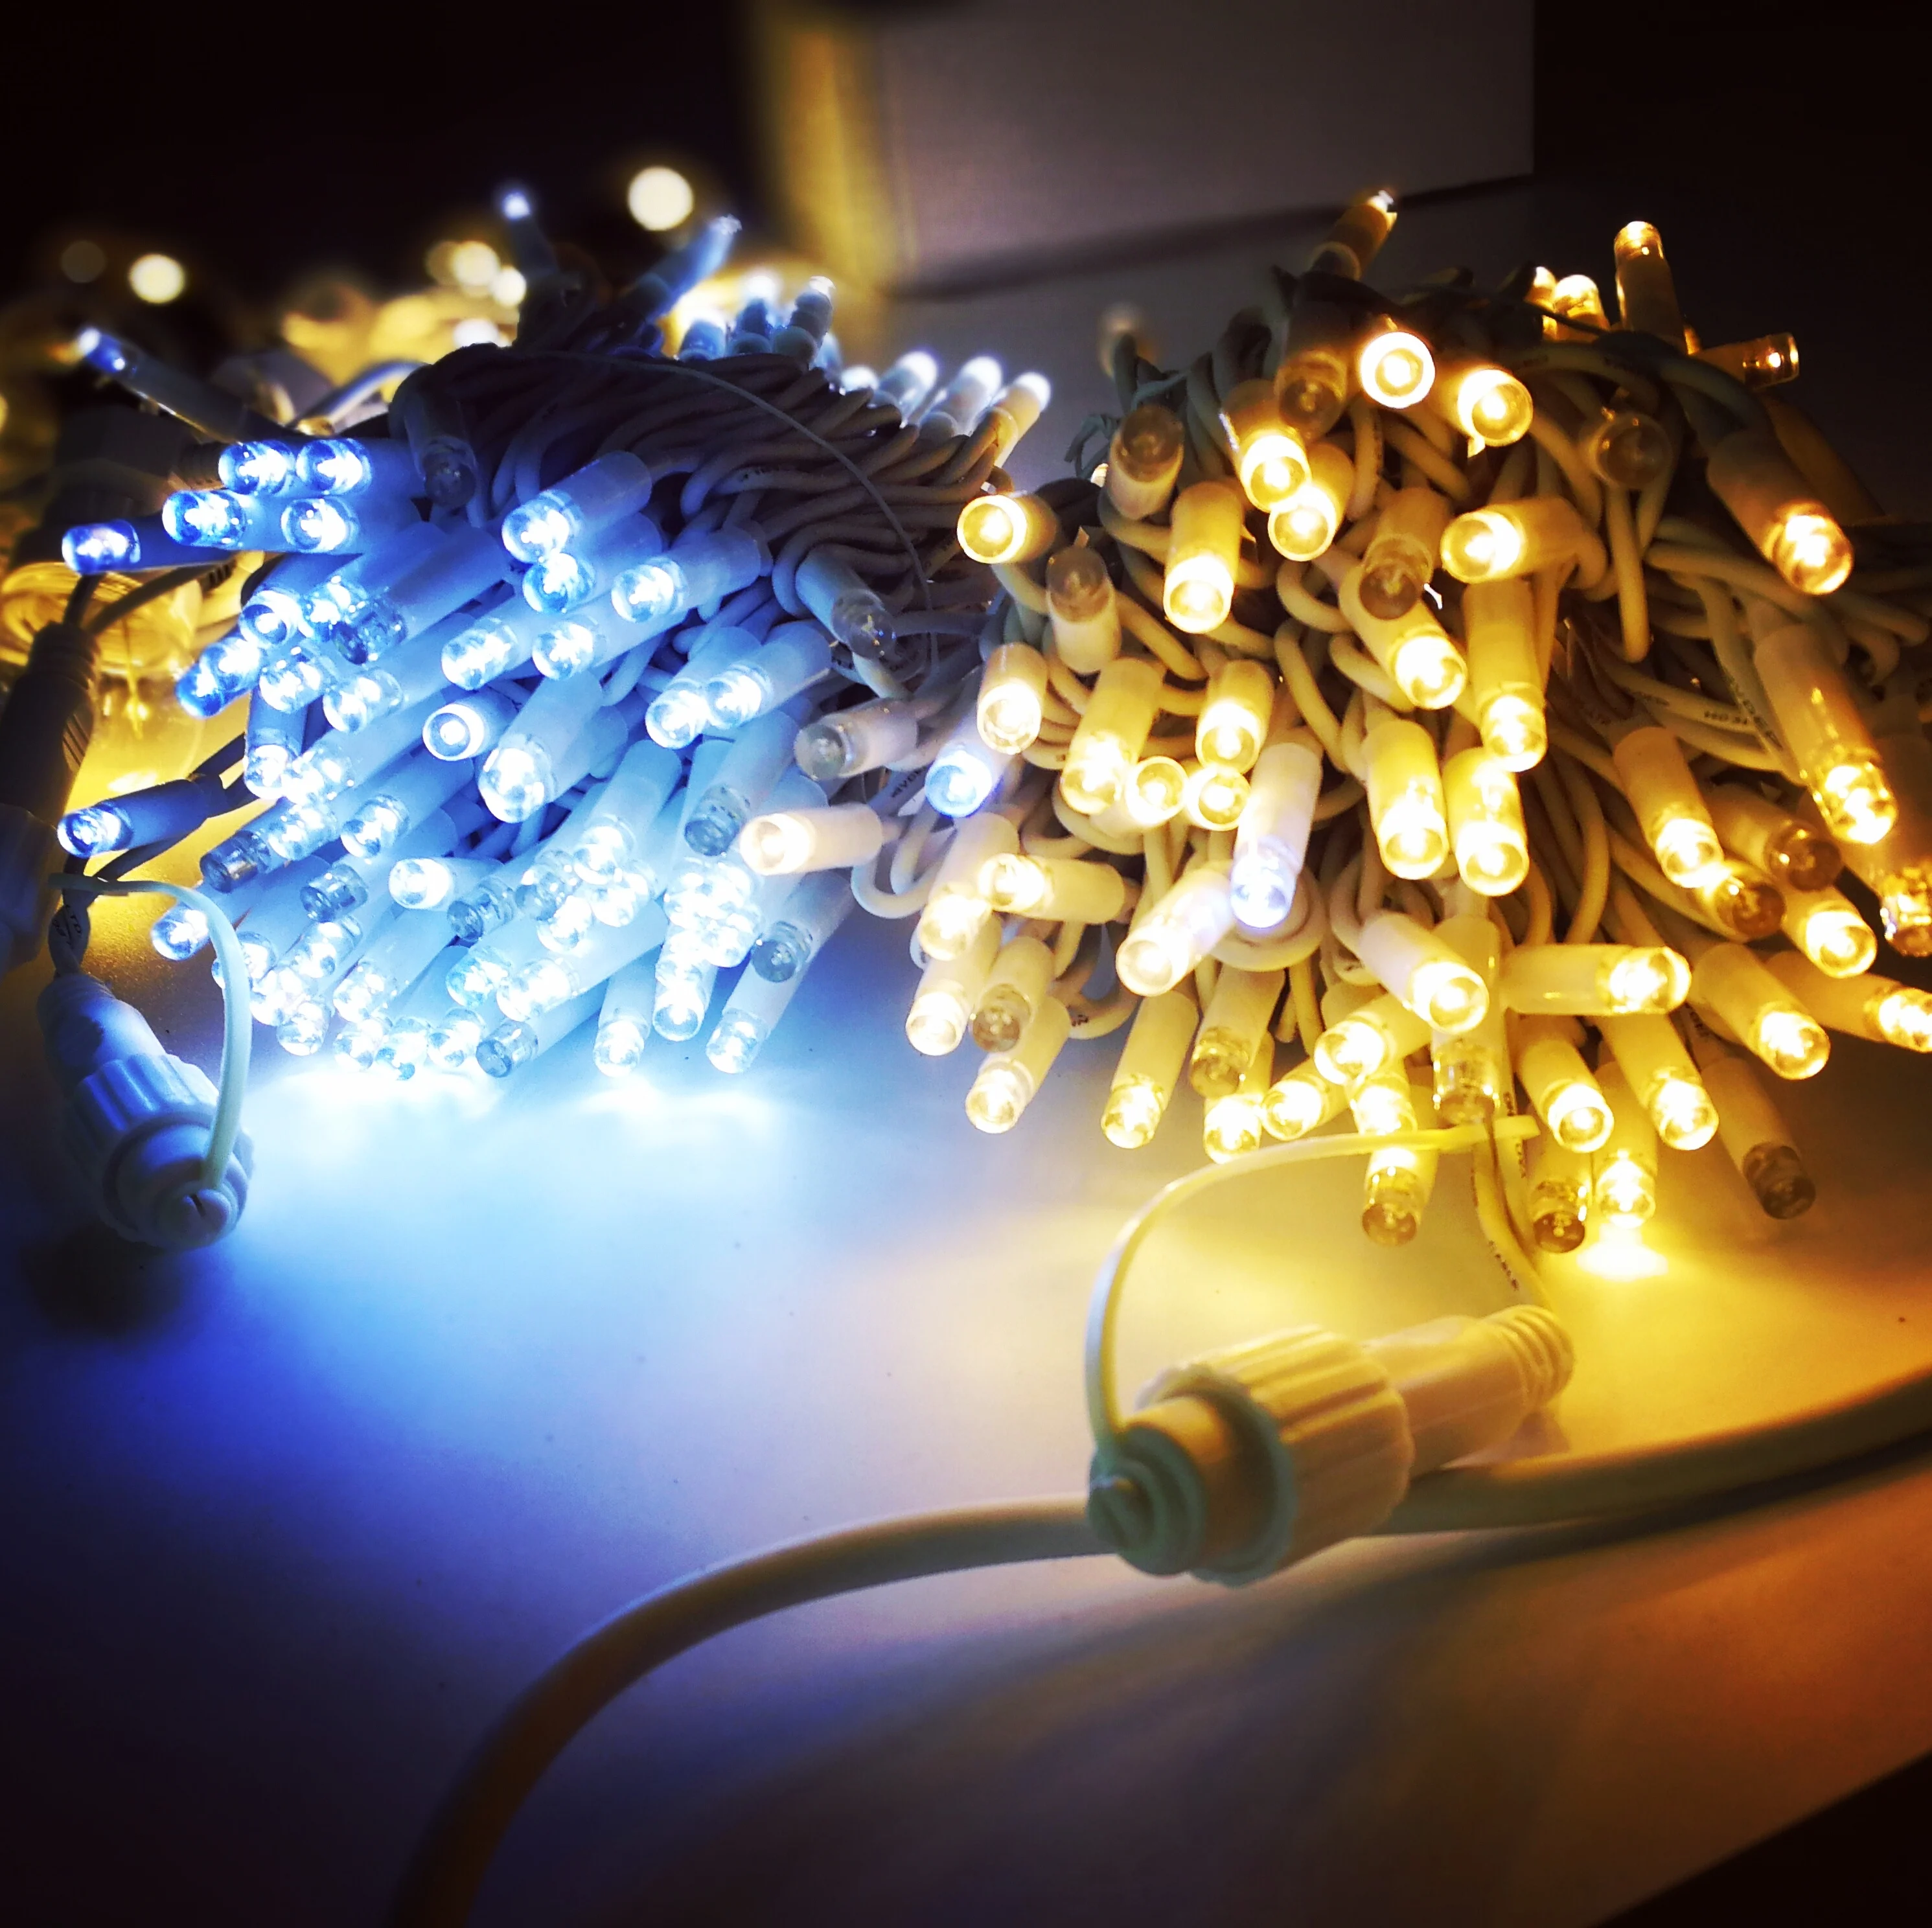 Waterproof outdoor festival LED Christmas Holiday Outdoor String Lights fairy Christmas lights